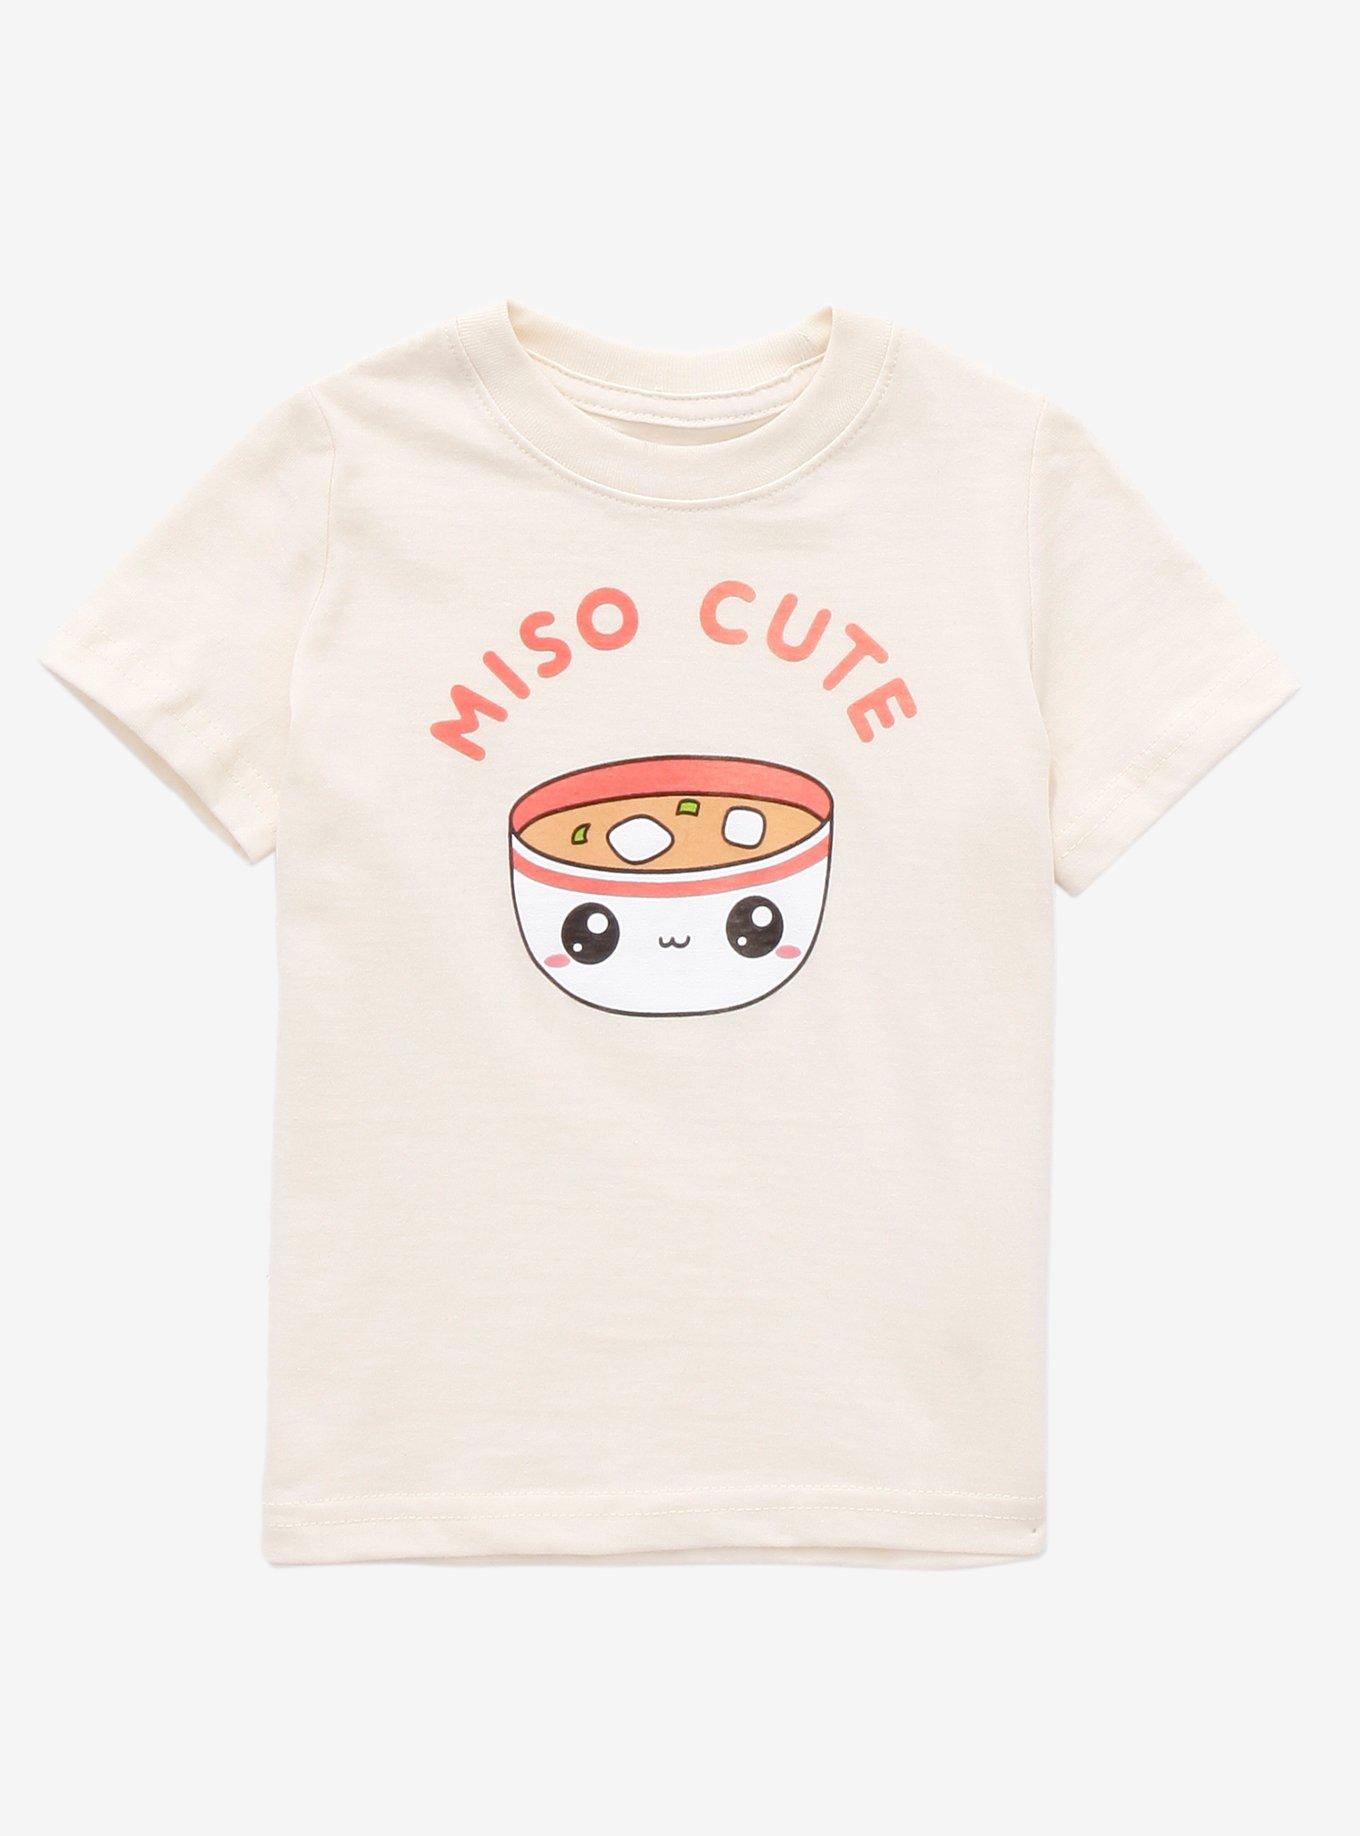 Miso Cute Toddler T-Shirt - BoxLunch Exclusive | BoxLunch